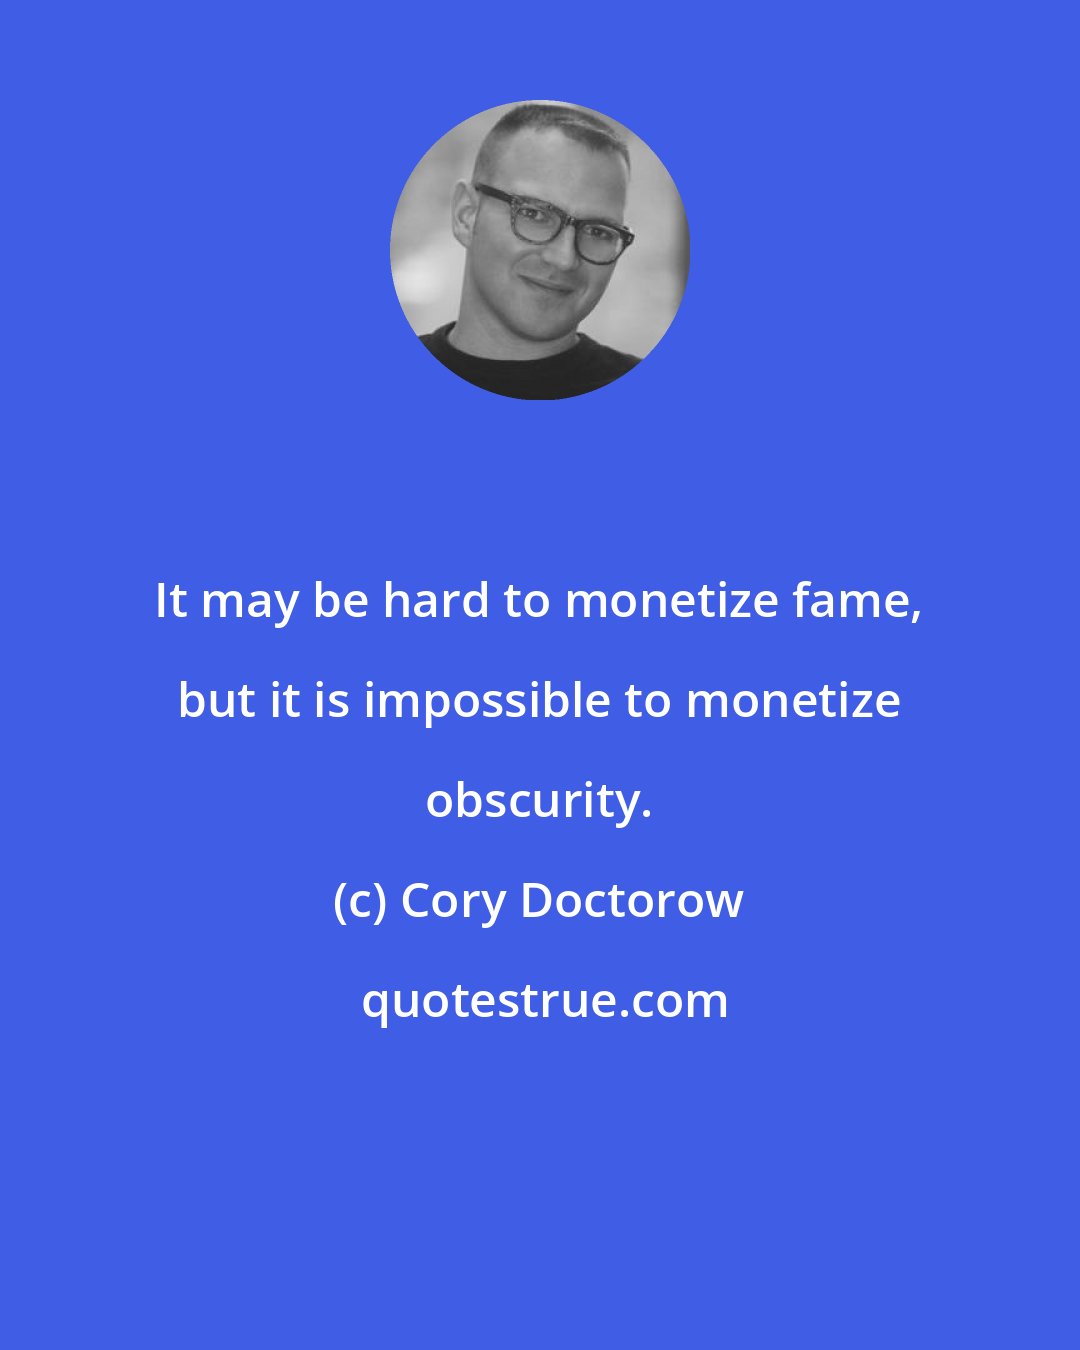 Cory Doctorow: It may be hard to monetize fame, but it is impossible to monetize obscurity.